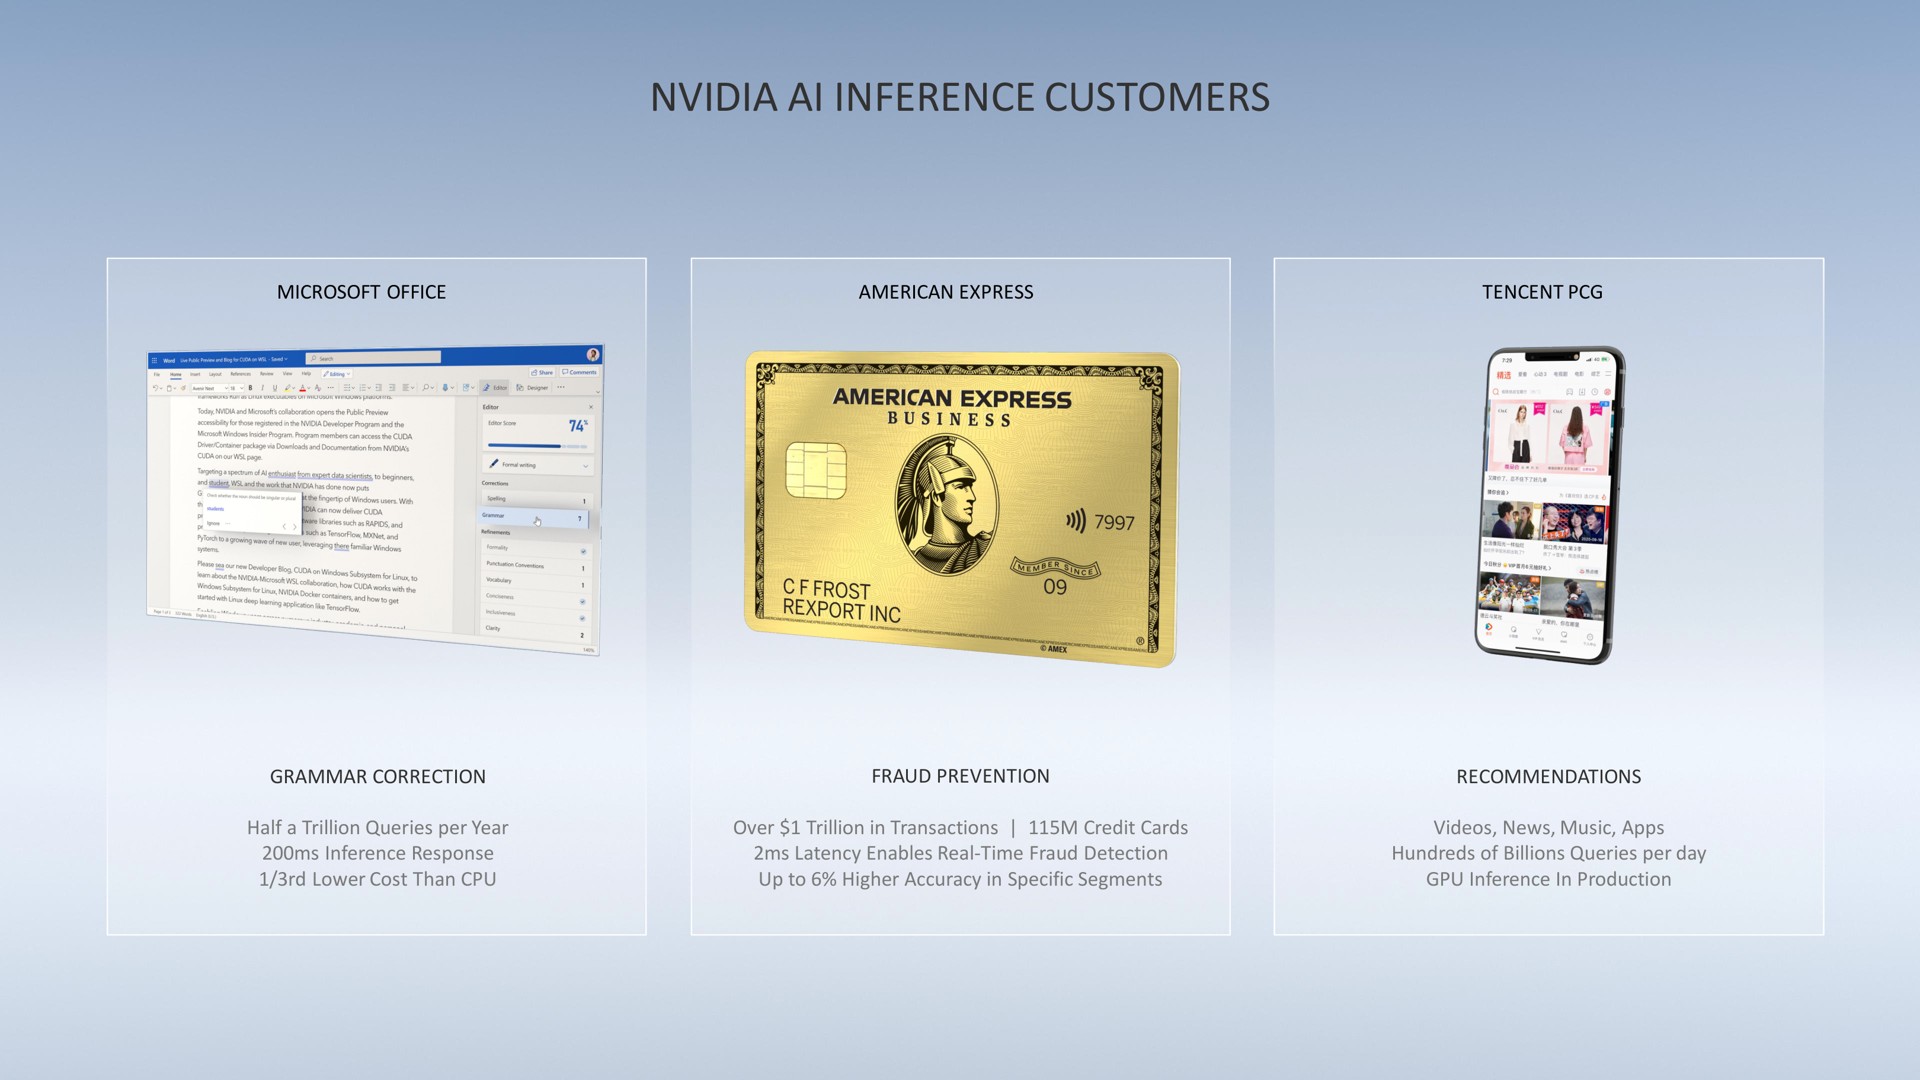 inference customers fie | NVIDIA